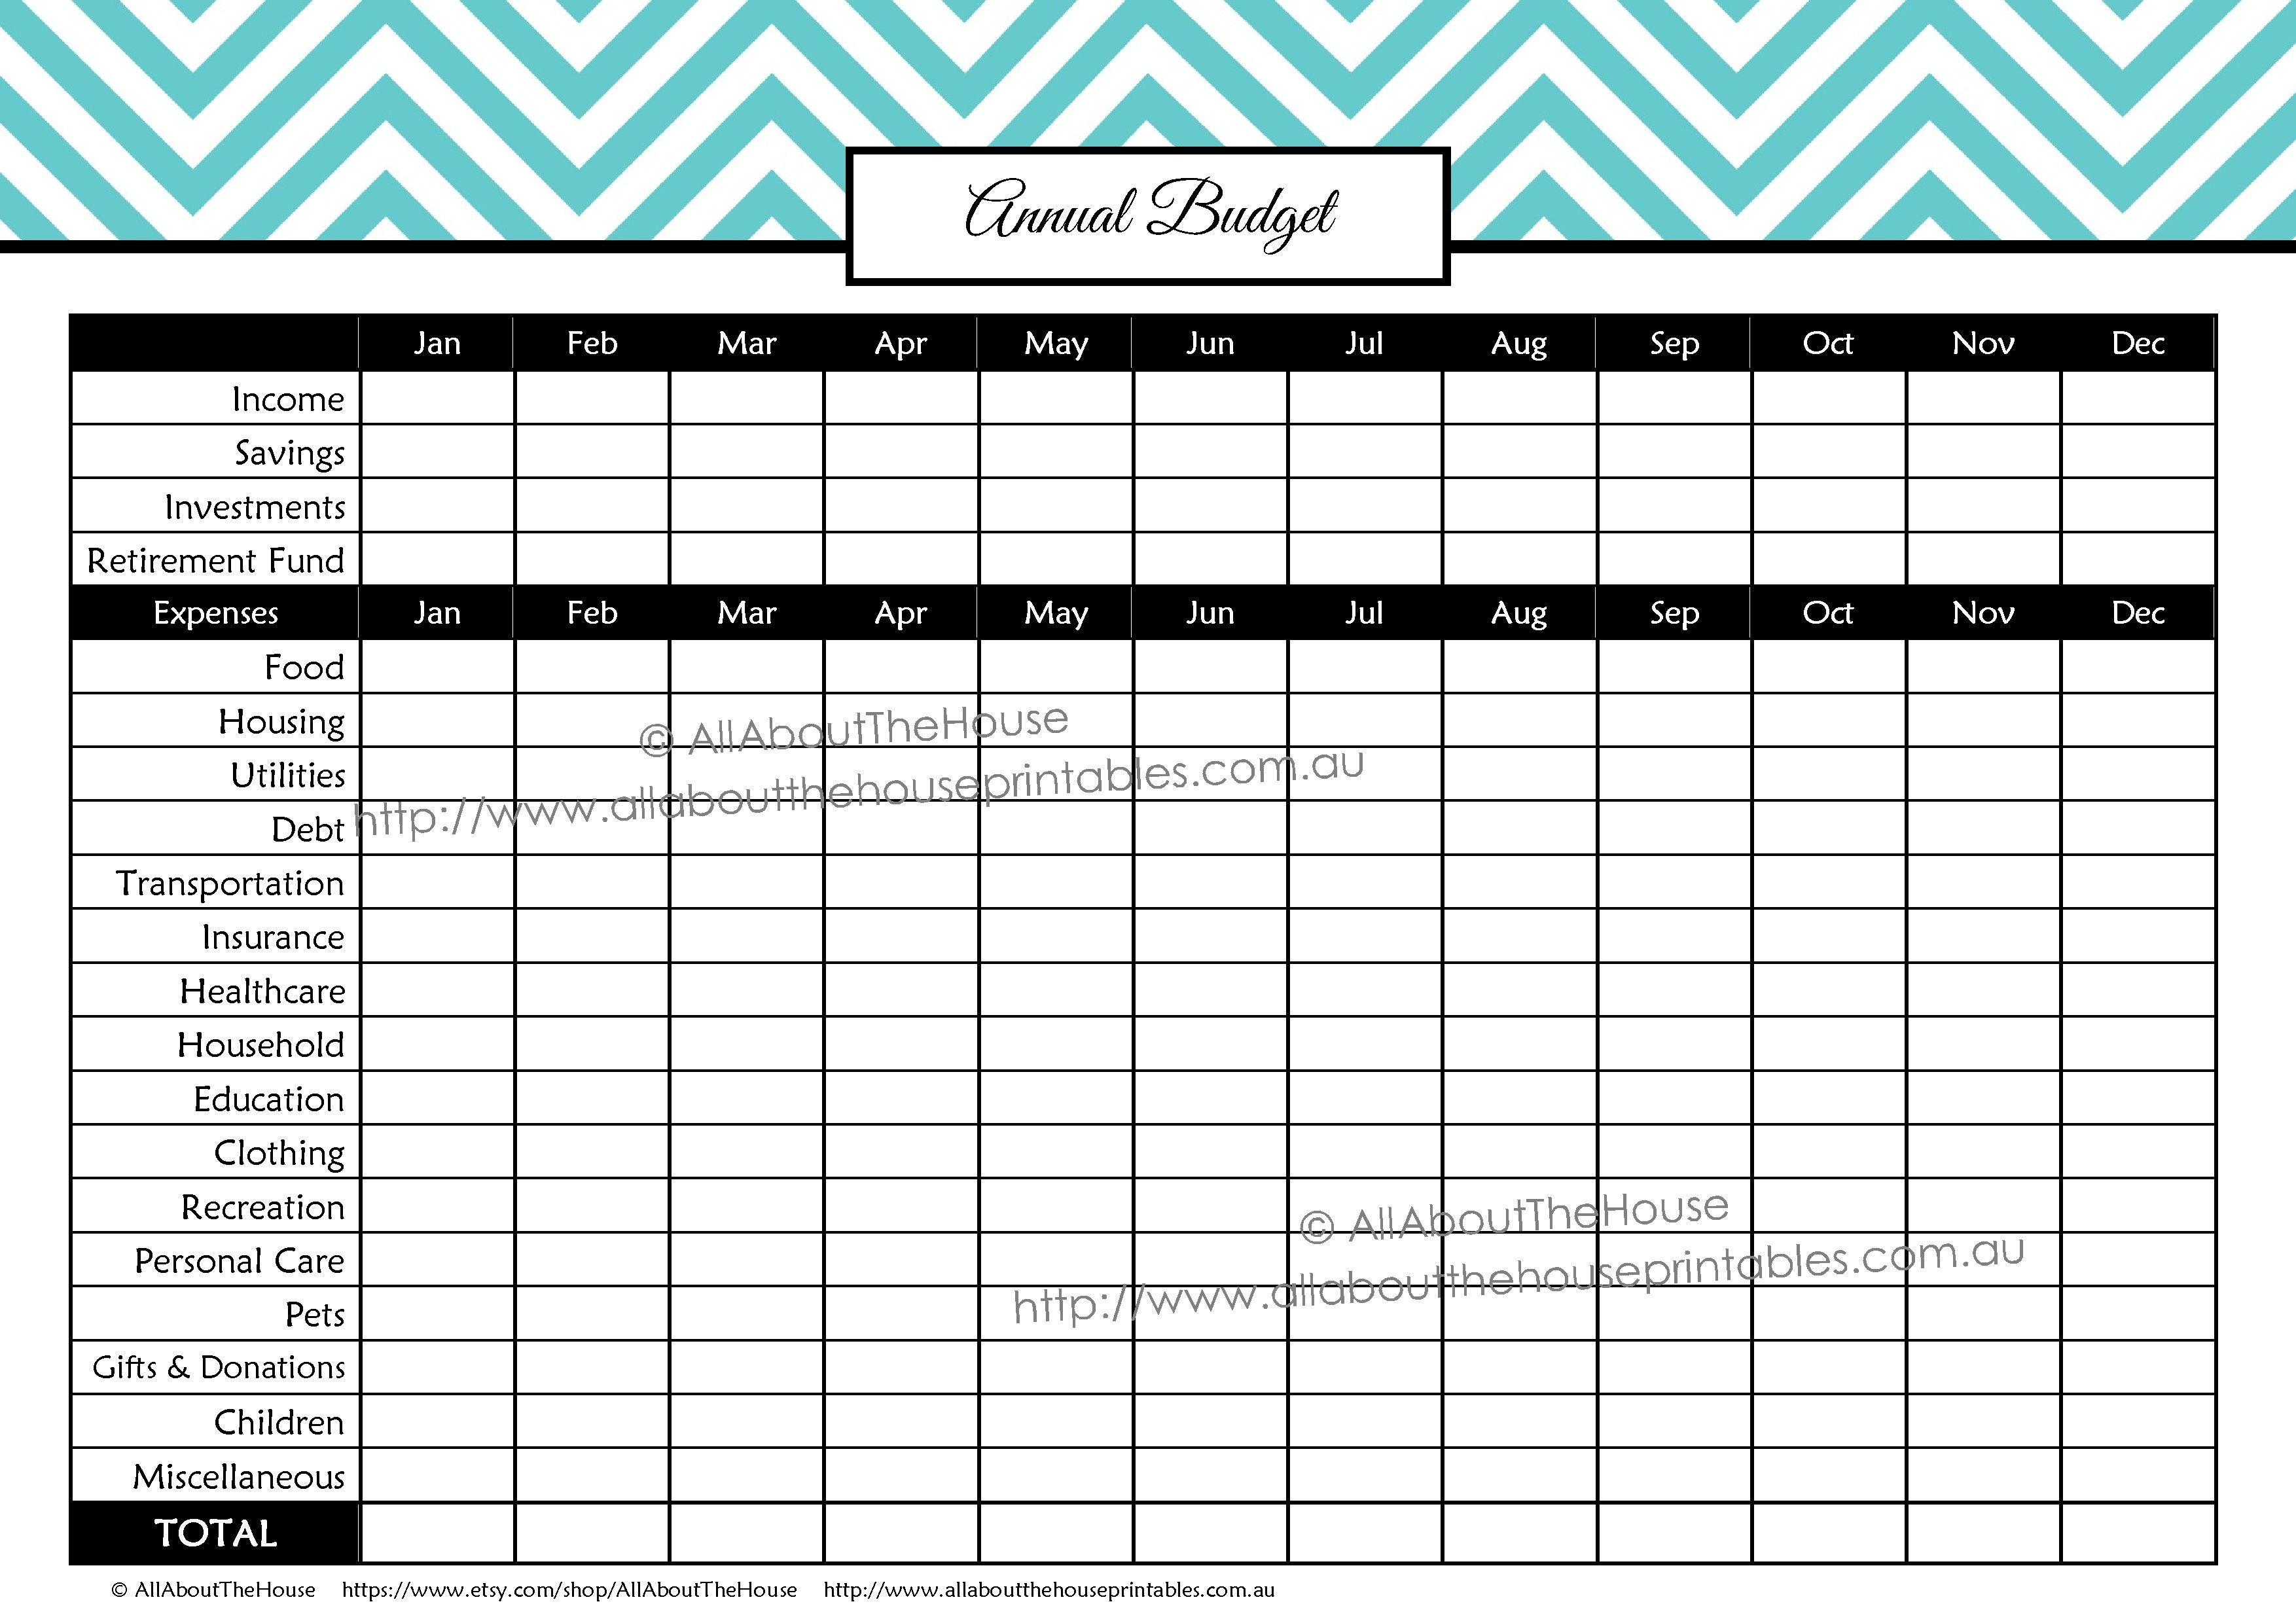 Free Bill Pay Checklist | Allaboutthehouse Printables Monthly Bill - Free Printable Monthly Bill Checklist